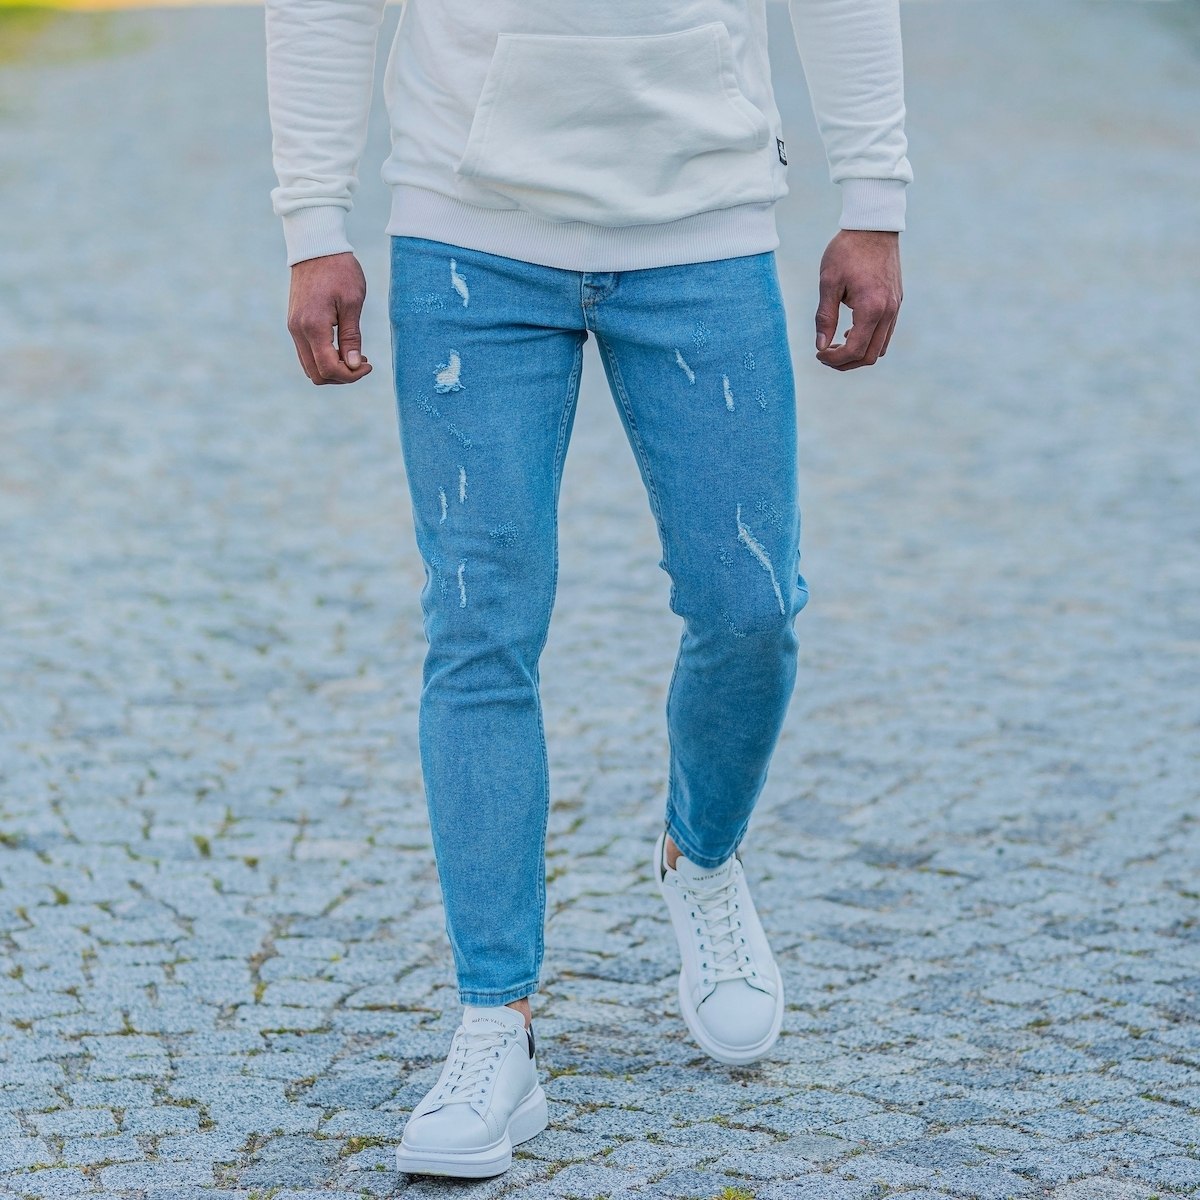 Men's Distorted Jeans In Ice Blue - 5